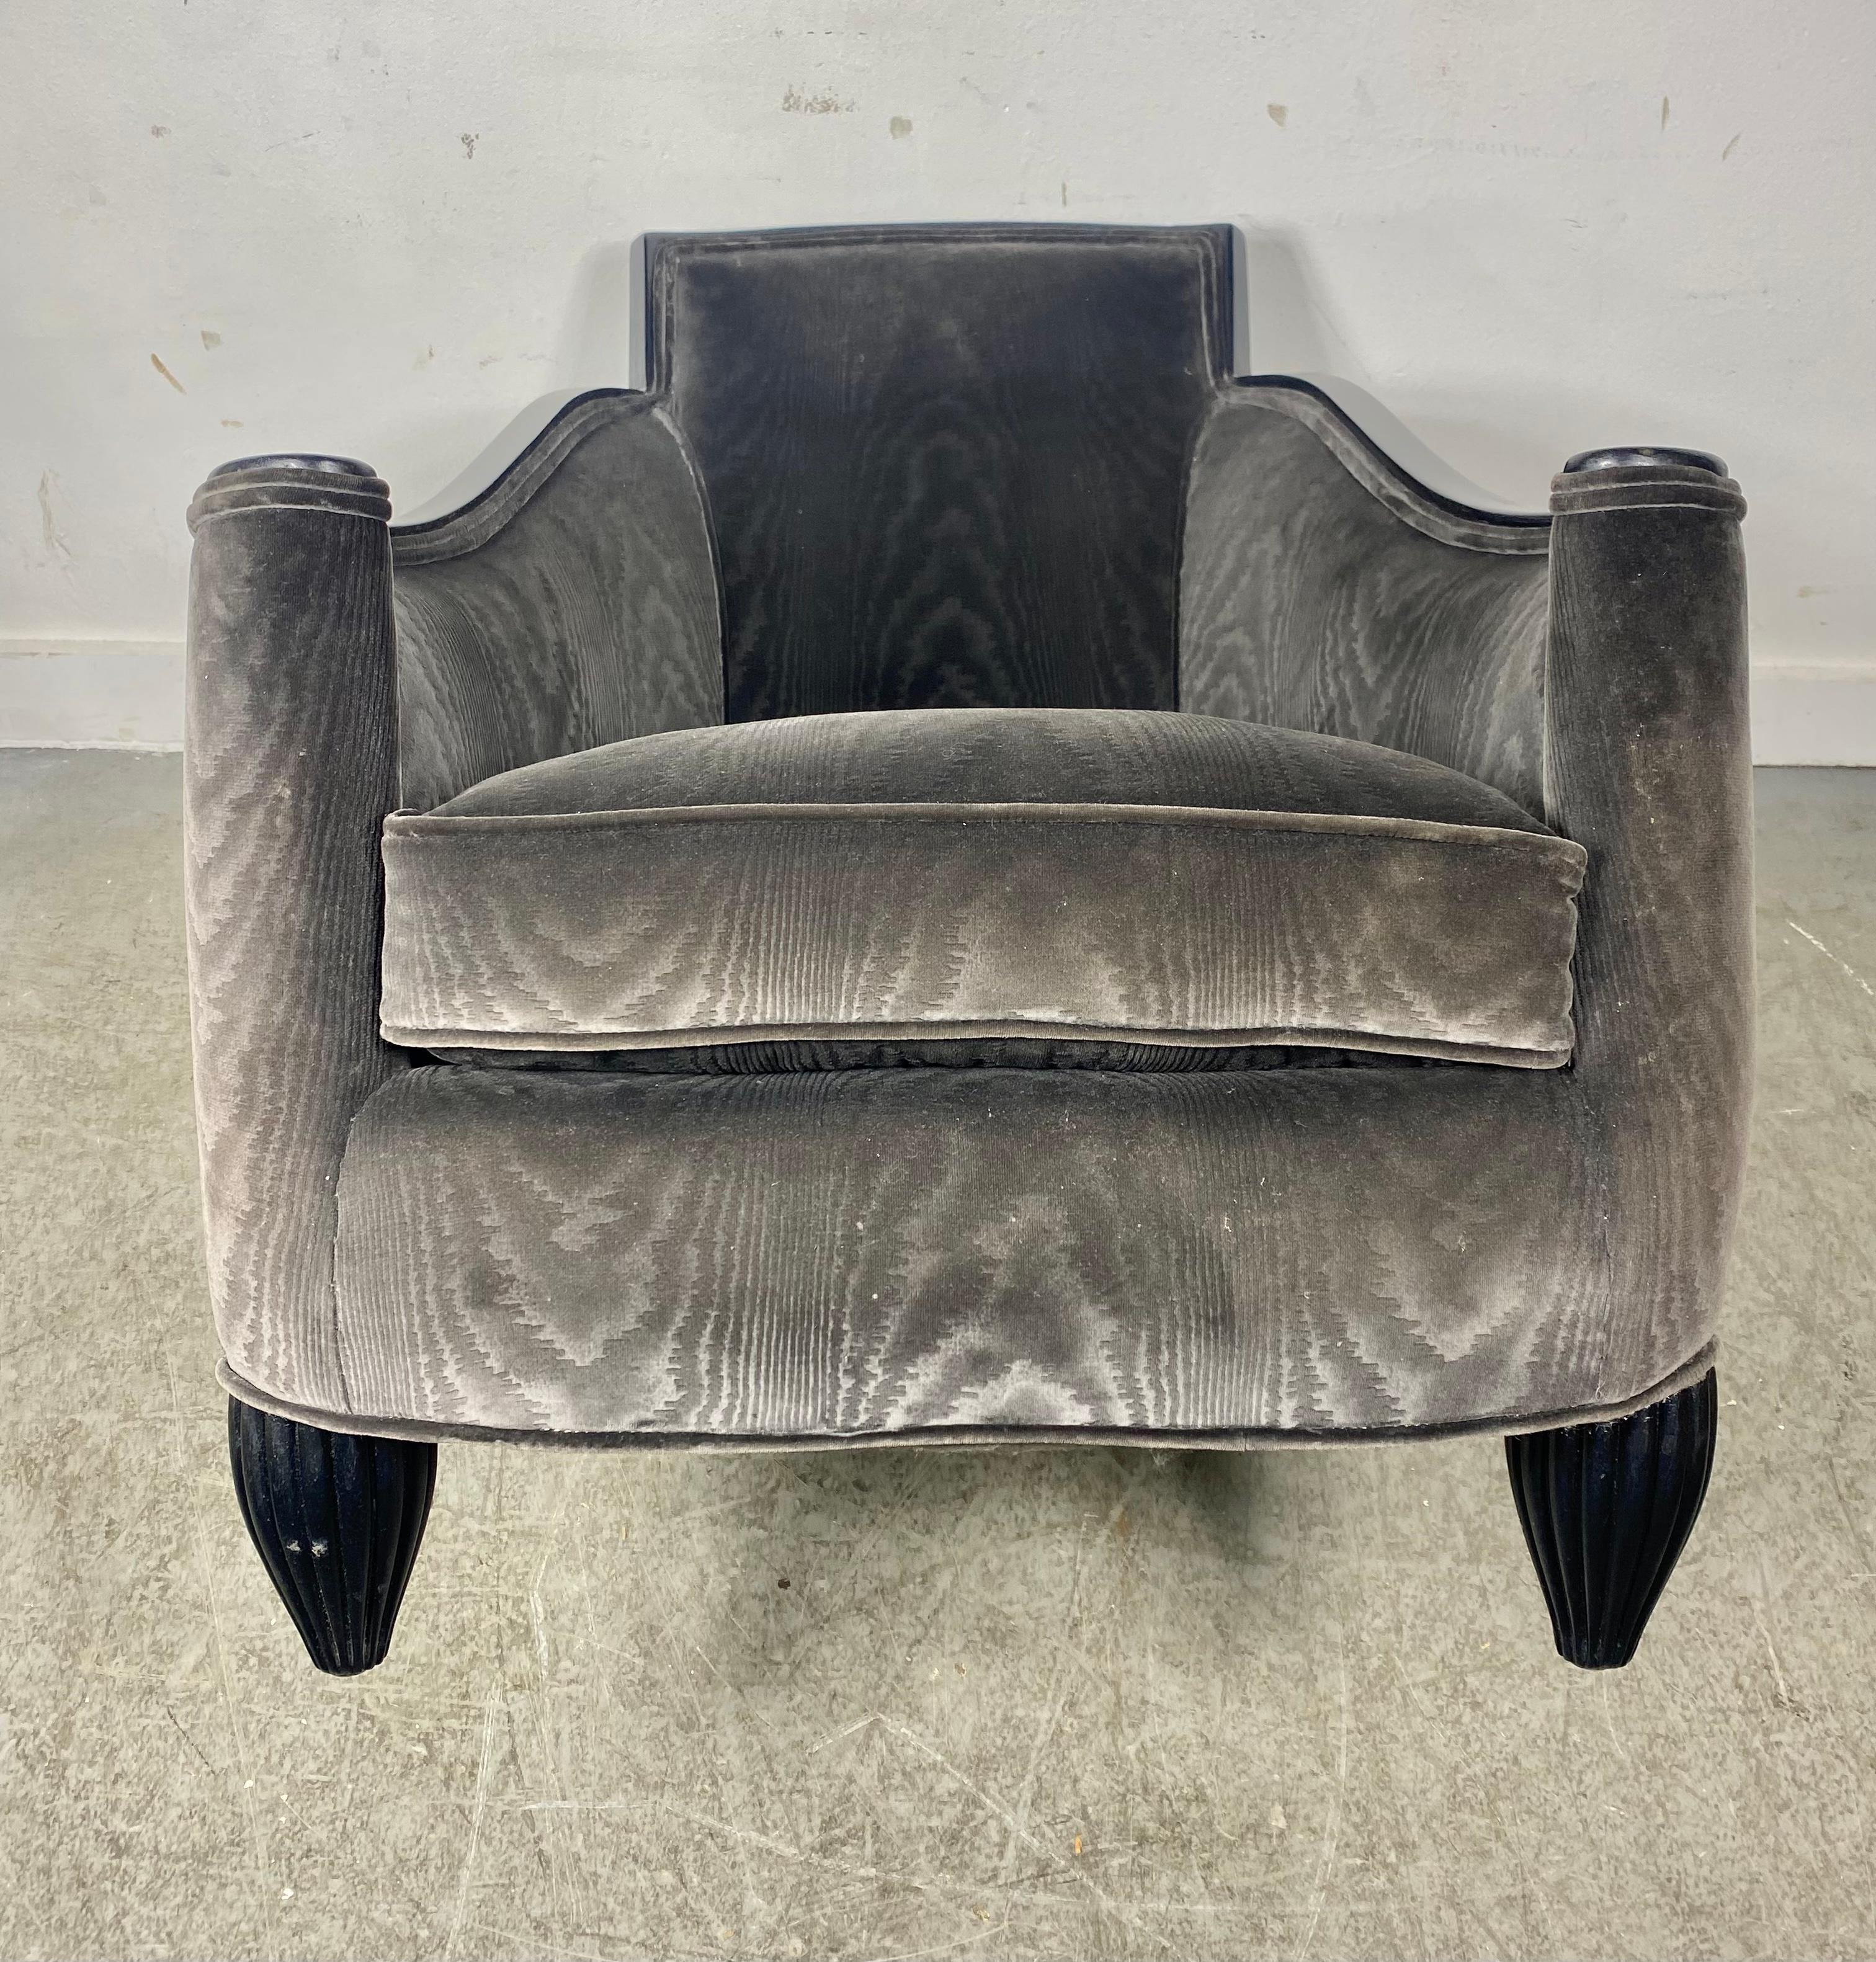 Stunning French Art Deco Lounge Chair, velvet / lacquer,  attributed to Jules Leleu... Classic French design.. Wonderful patterned velvet/mohair fabric,, Extremely comfortable.. Perfect accent chair. Hand delivery avail to New York City or anywhere